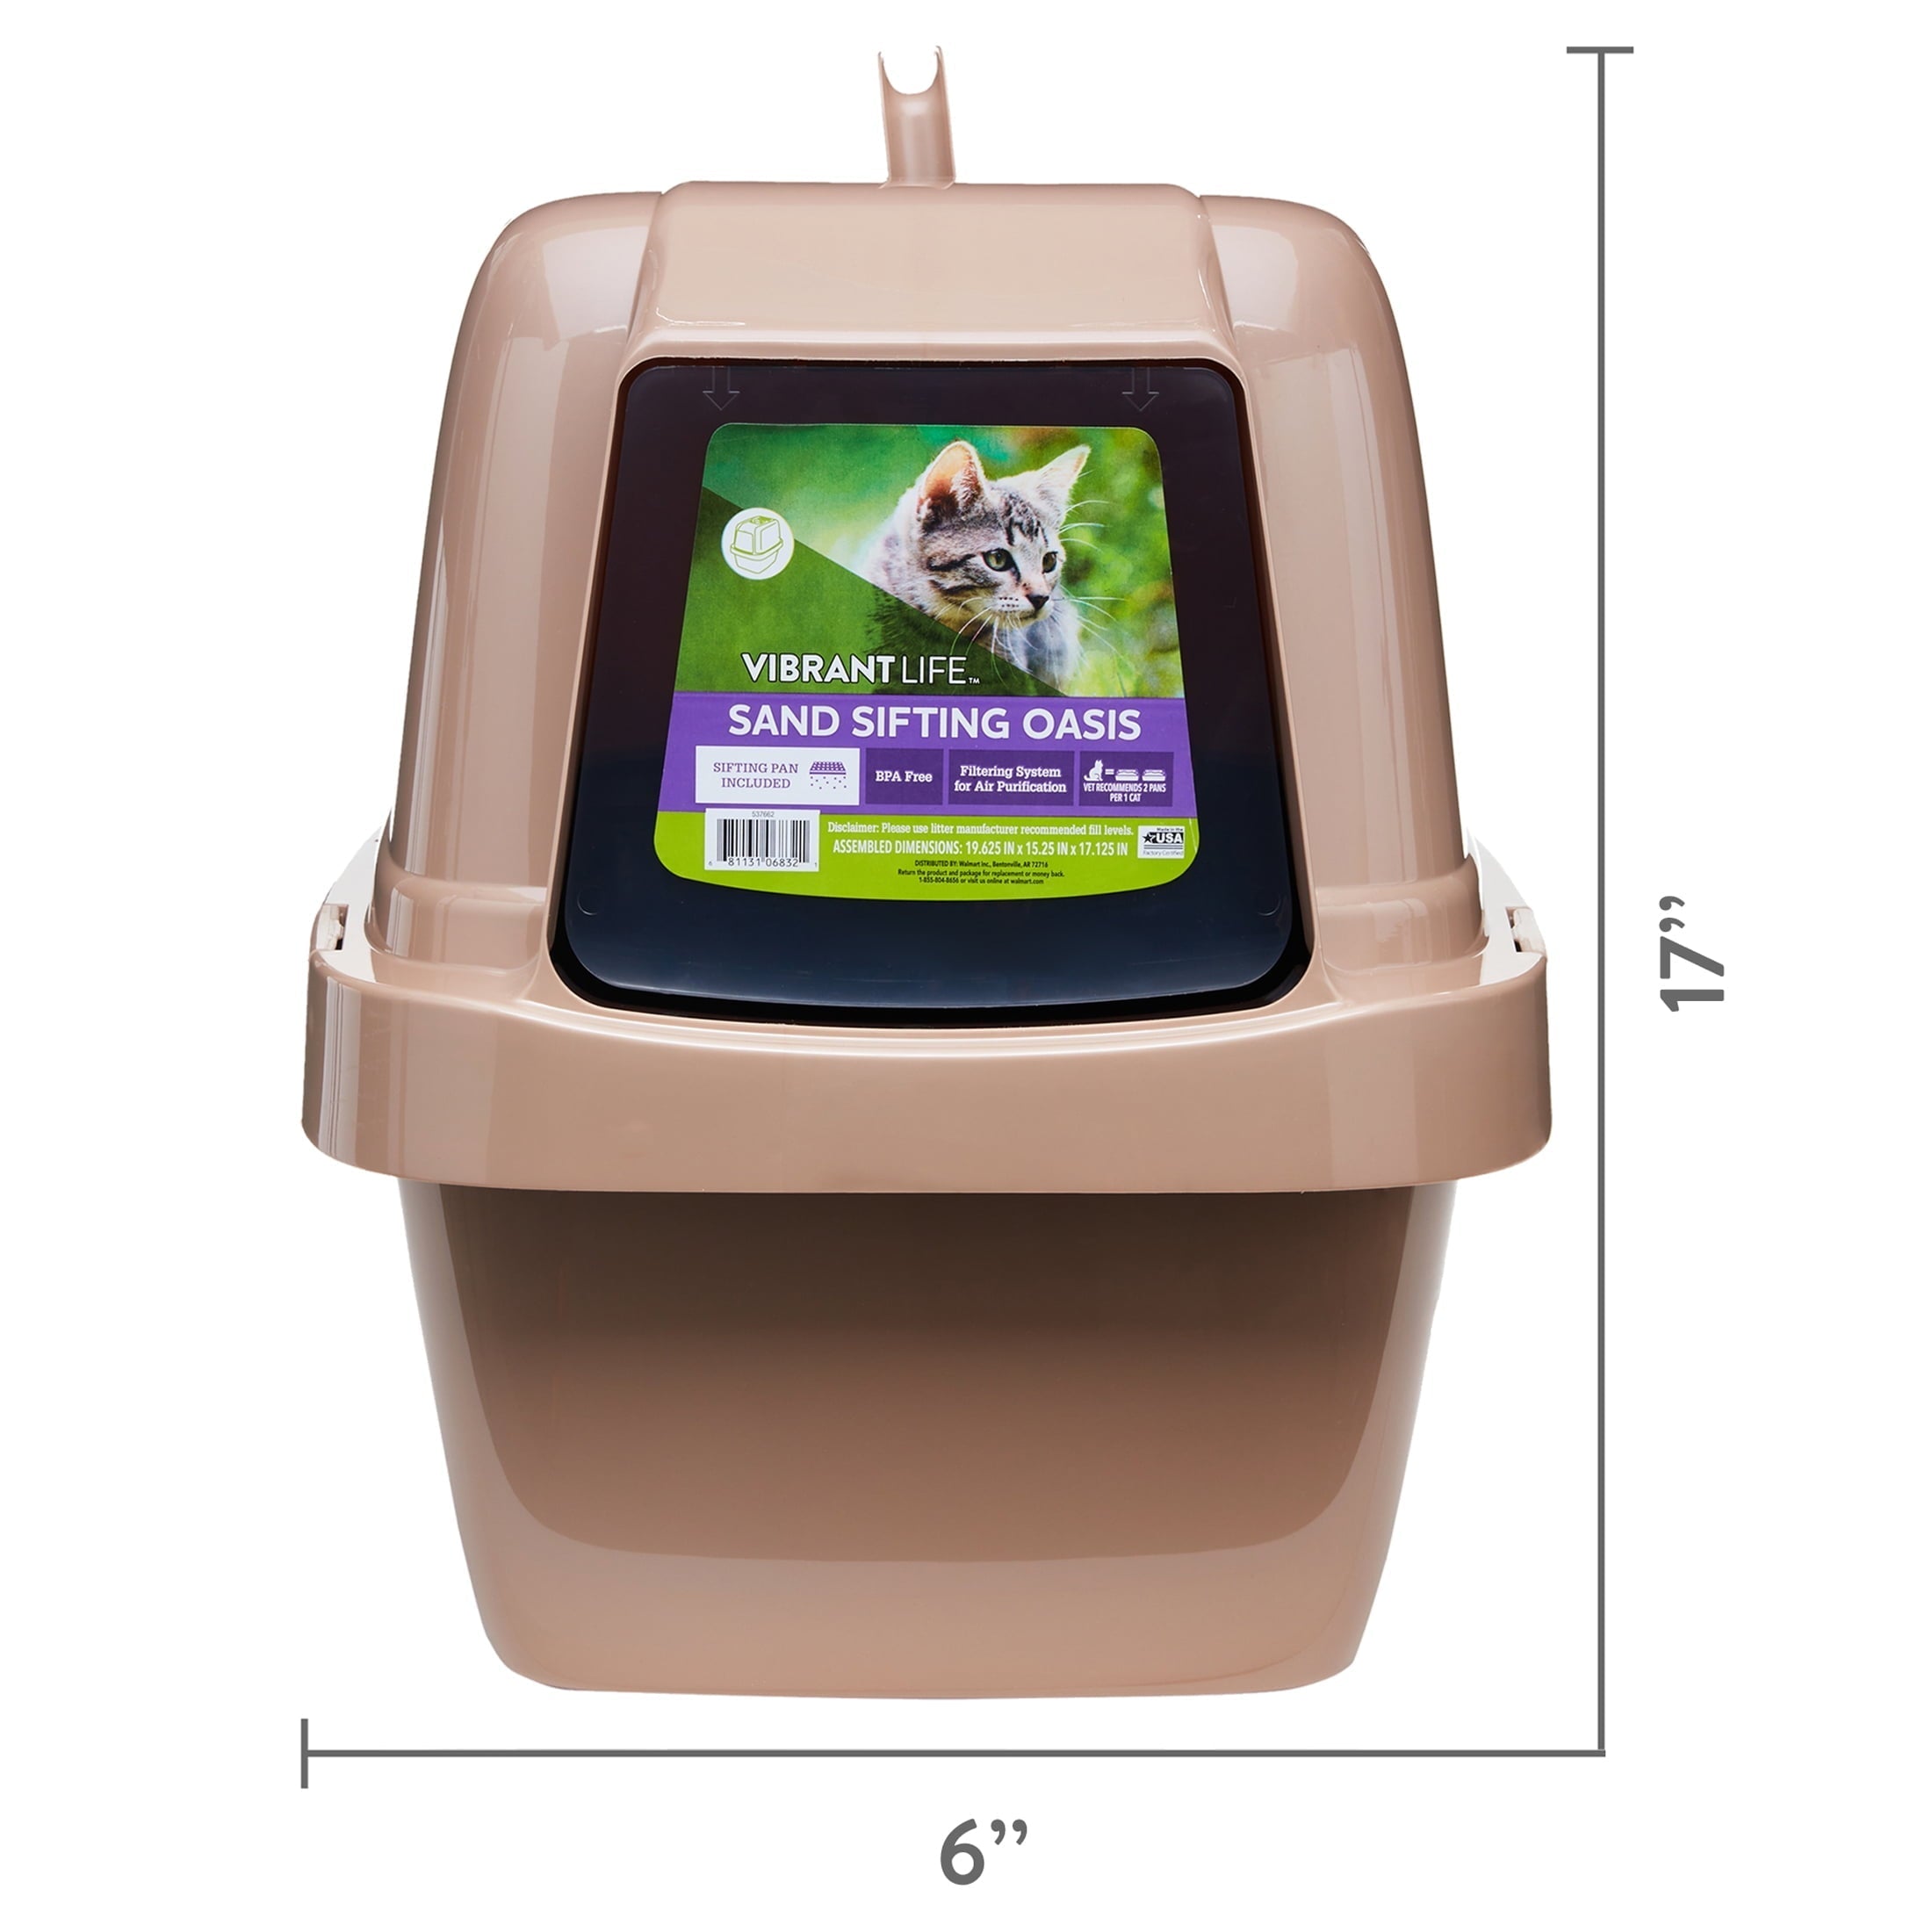 Wholesale prices with free shipping all over United States Vibrant Life Sand Sifting Oasis Cat Litter Box, Beige - Steven Deals